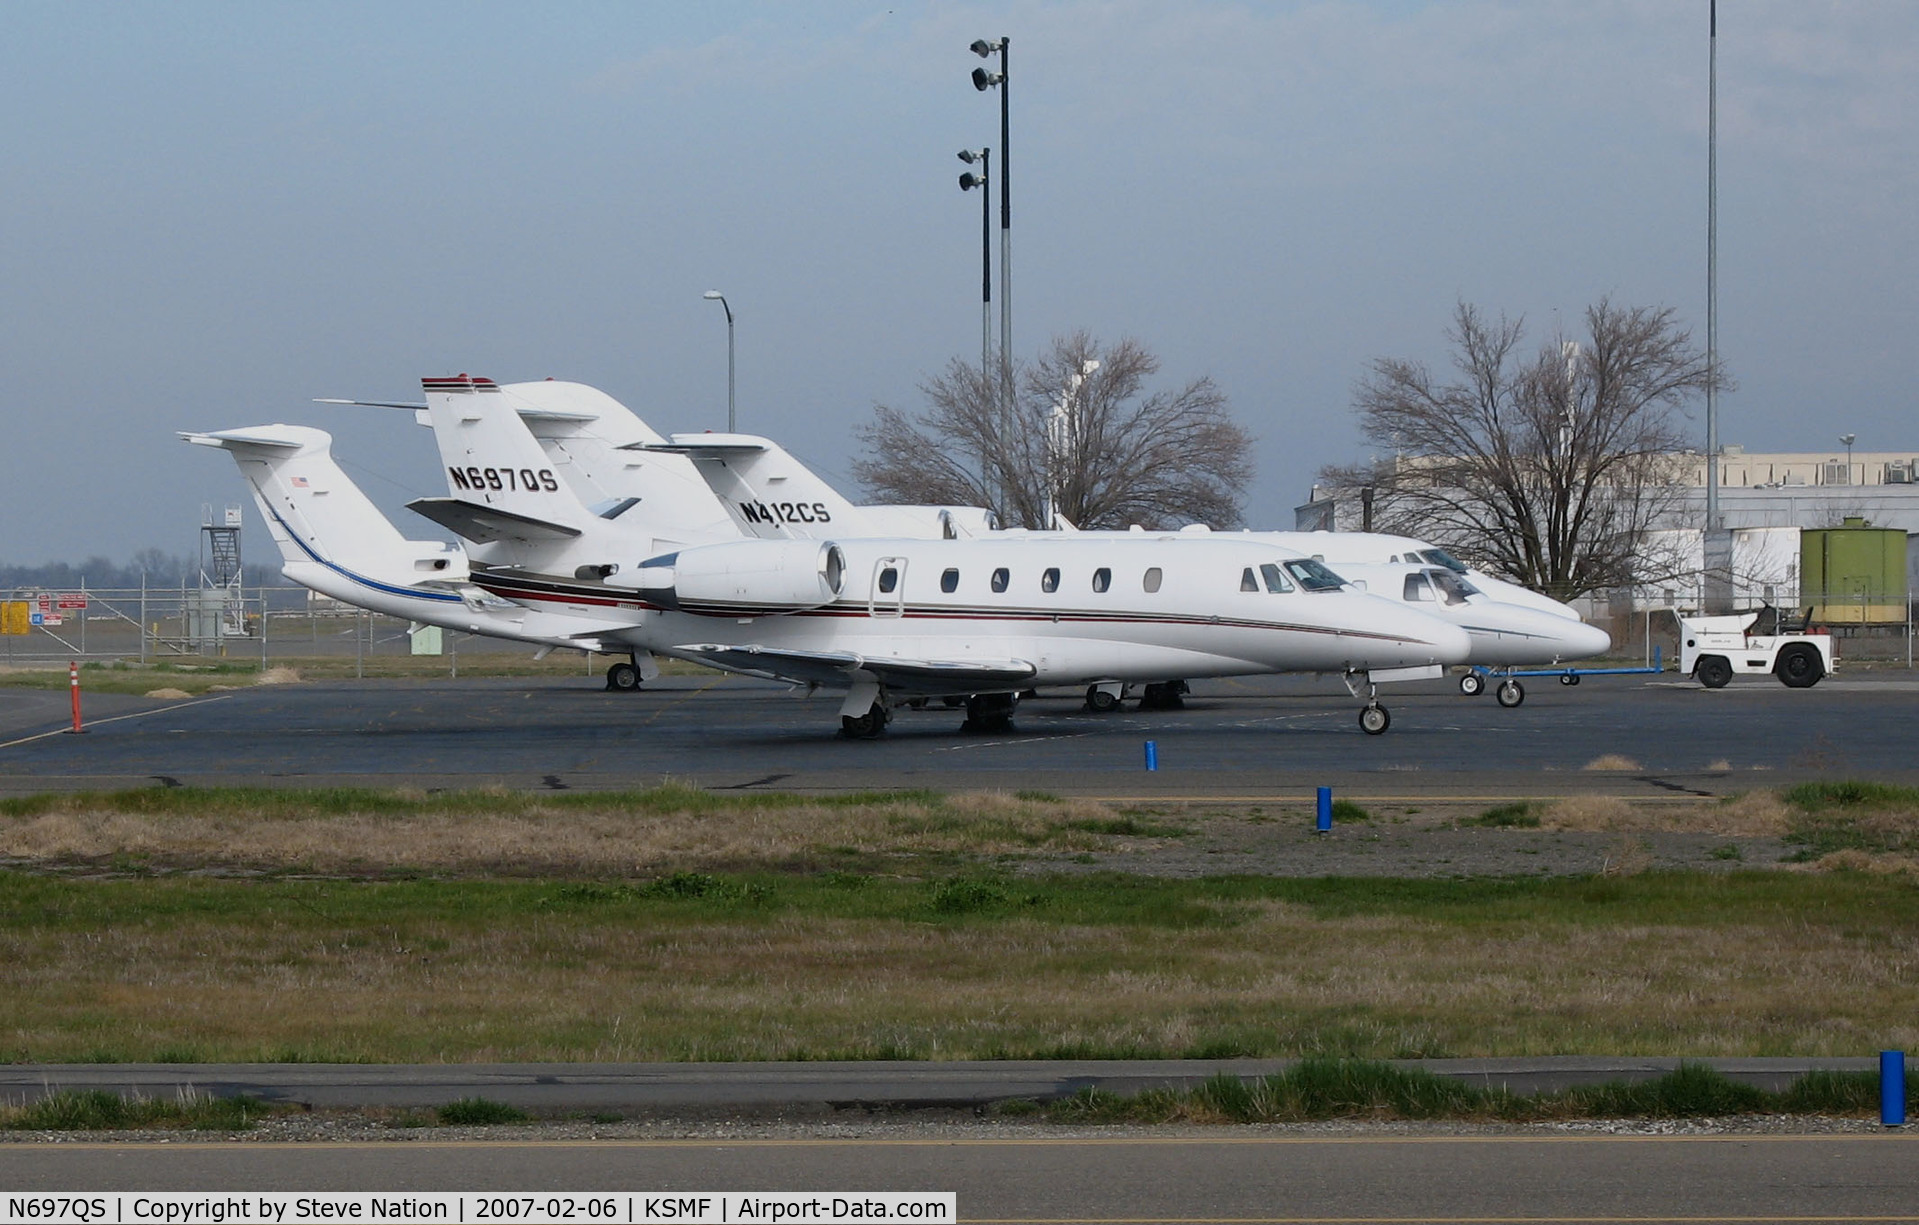 N697QS, 2001 Cessna 560XL Citation Excel C/N 560-5197, Netjets 2001 Cessna 560XL on Cessna Citation Center ramp @ Sacramento International Airport, CA (to N697SD DS Advisors, Chicago, IL 2016-03-09)